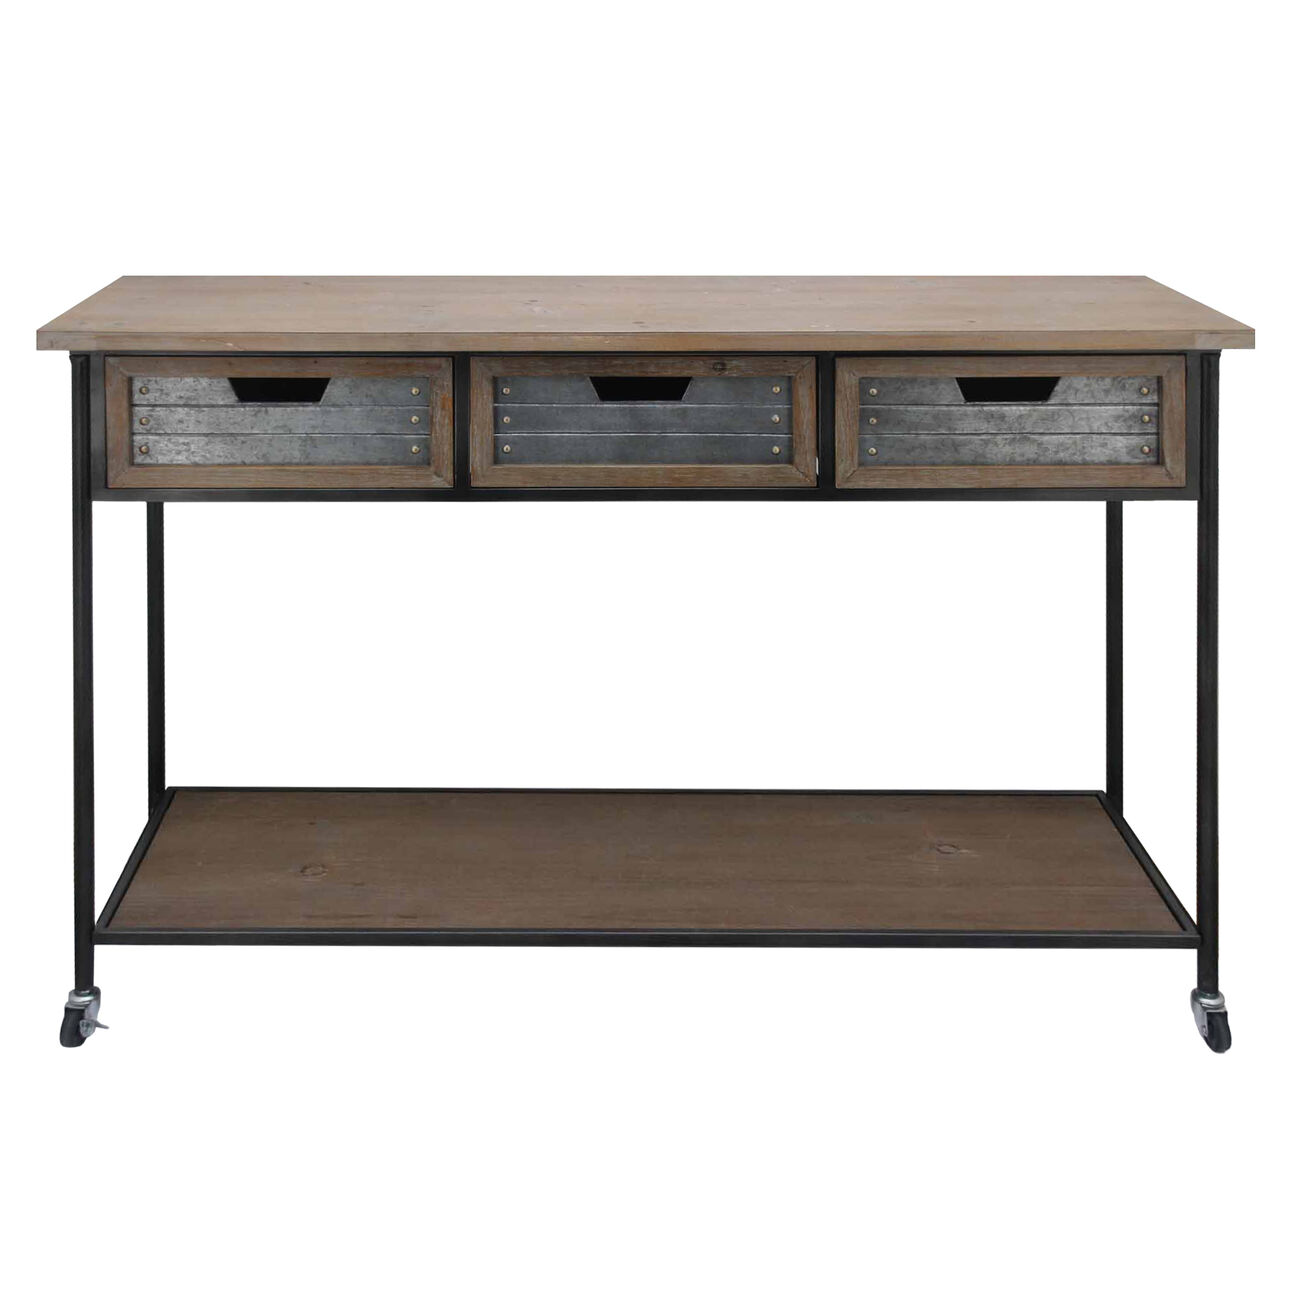 Caster Supported 3 Drawer Wood and Metal Console Table, Brown and Black